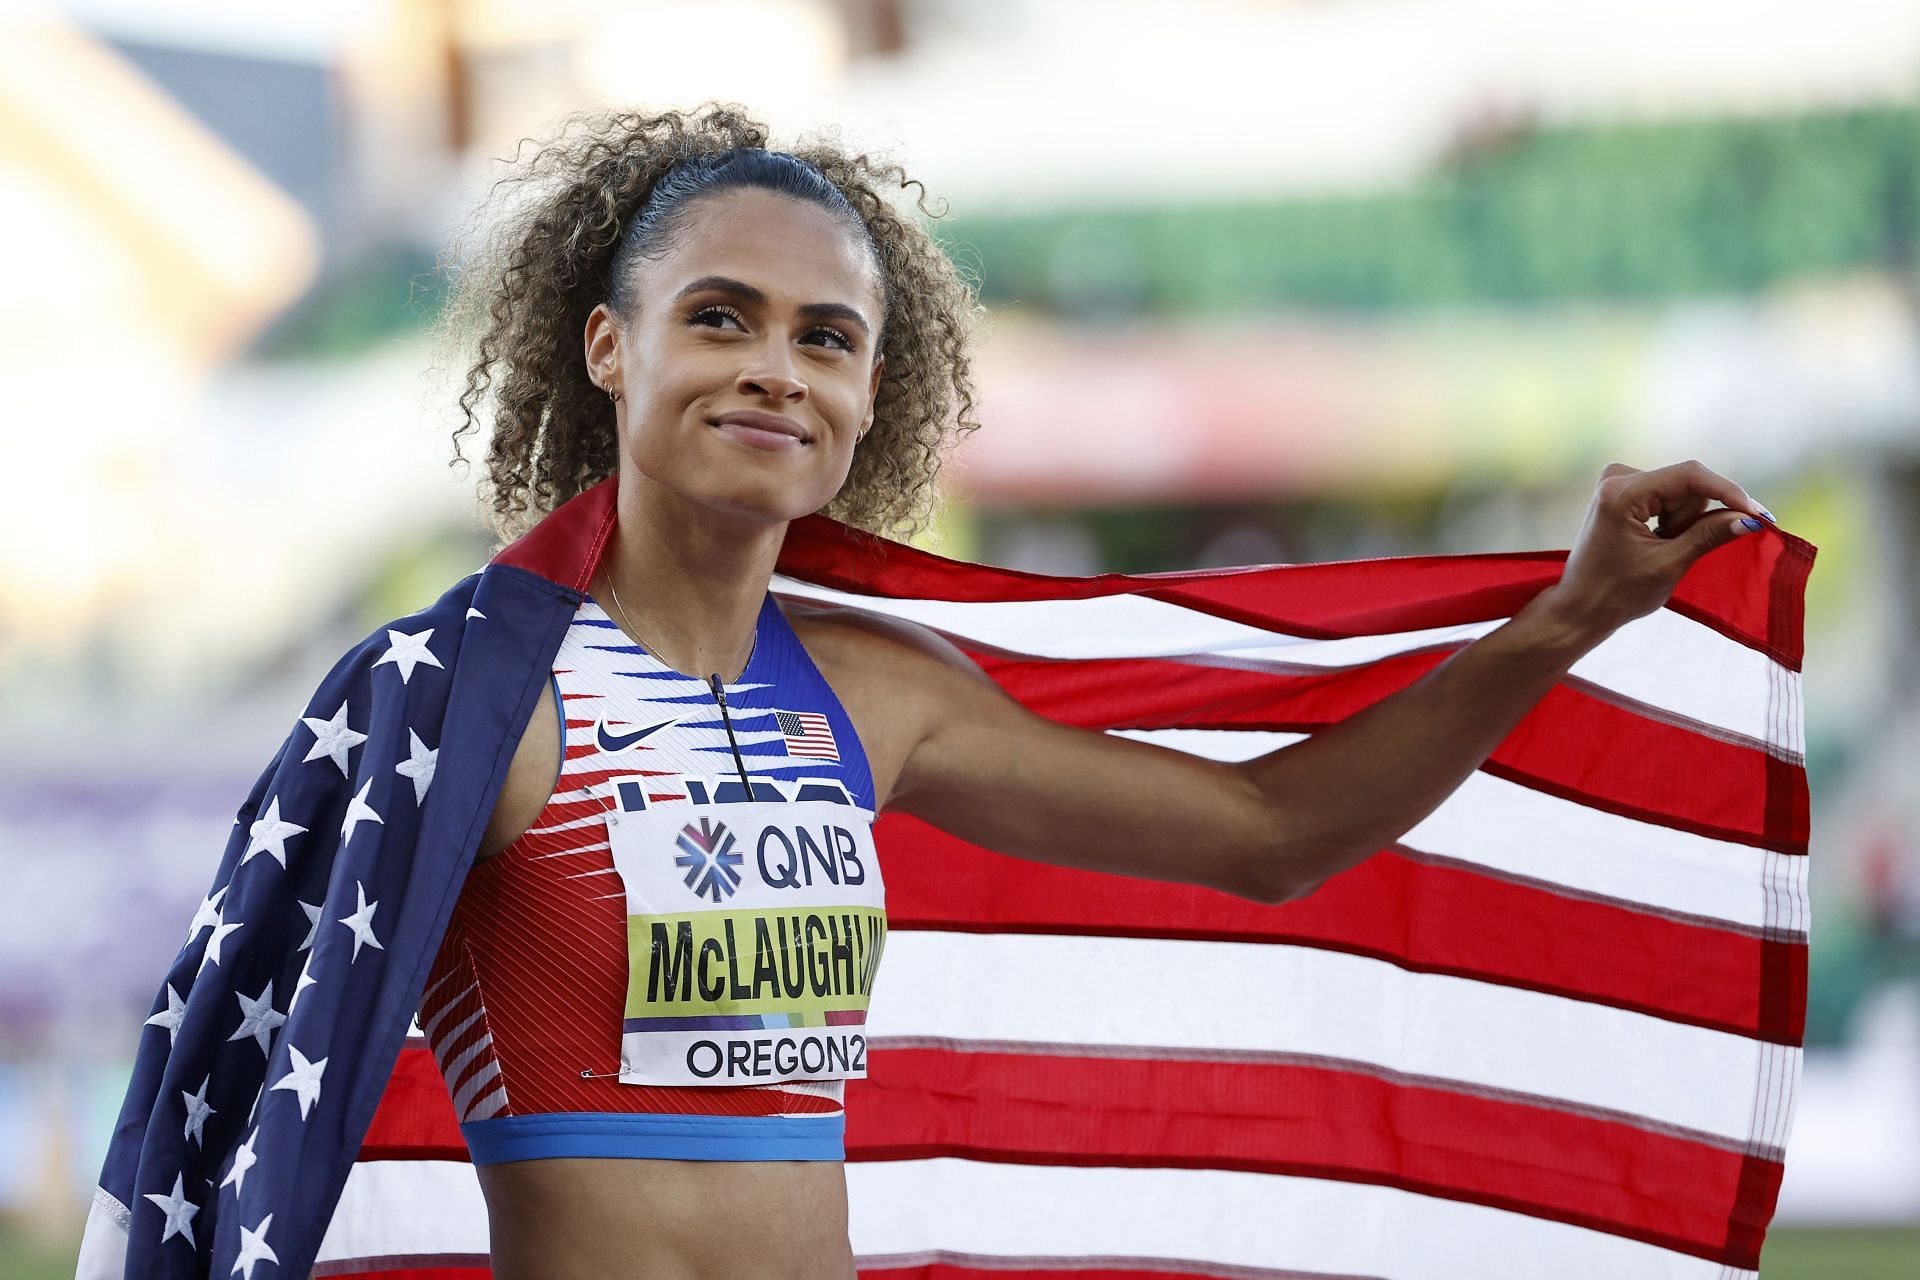 Sydney McLaughlin celebrates winning gold in the Women&#039;s 4x400m Relay Final at the 2022 World Athletics Championships at Hayward Field in Eugene, Oregon.